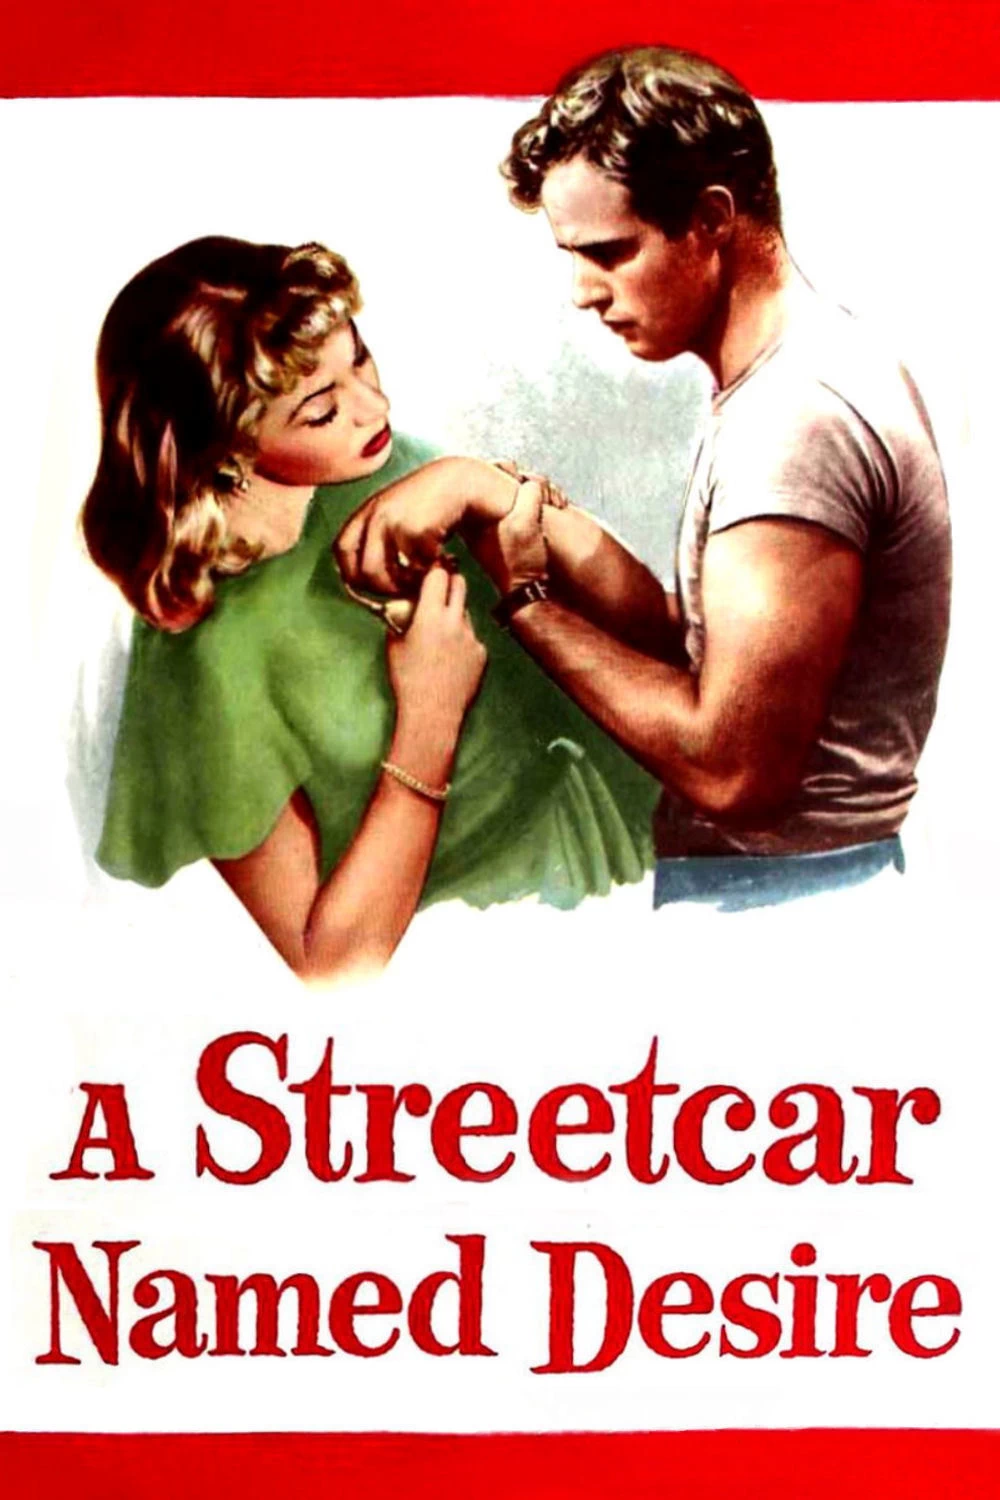 Named desire. A Streetcar named Desire by Tennessee Williams. A Streetcar named Desire 1951. A Streetcar named Desire, 1995 Постер.